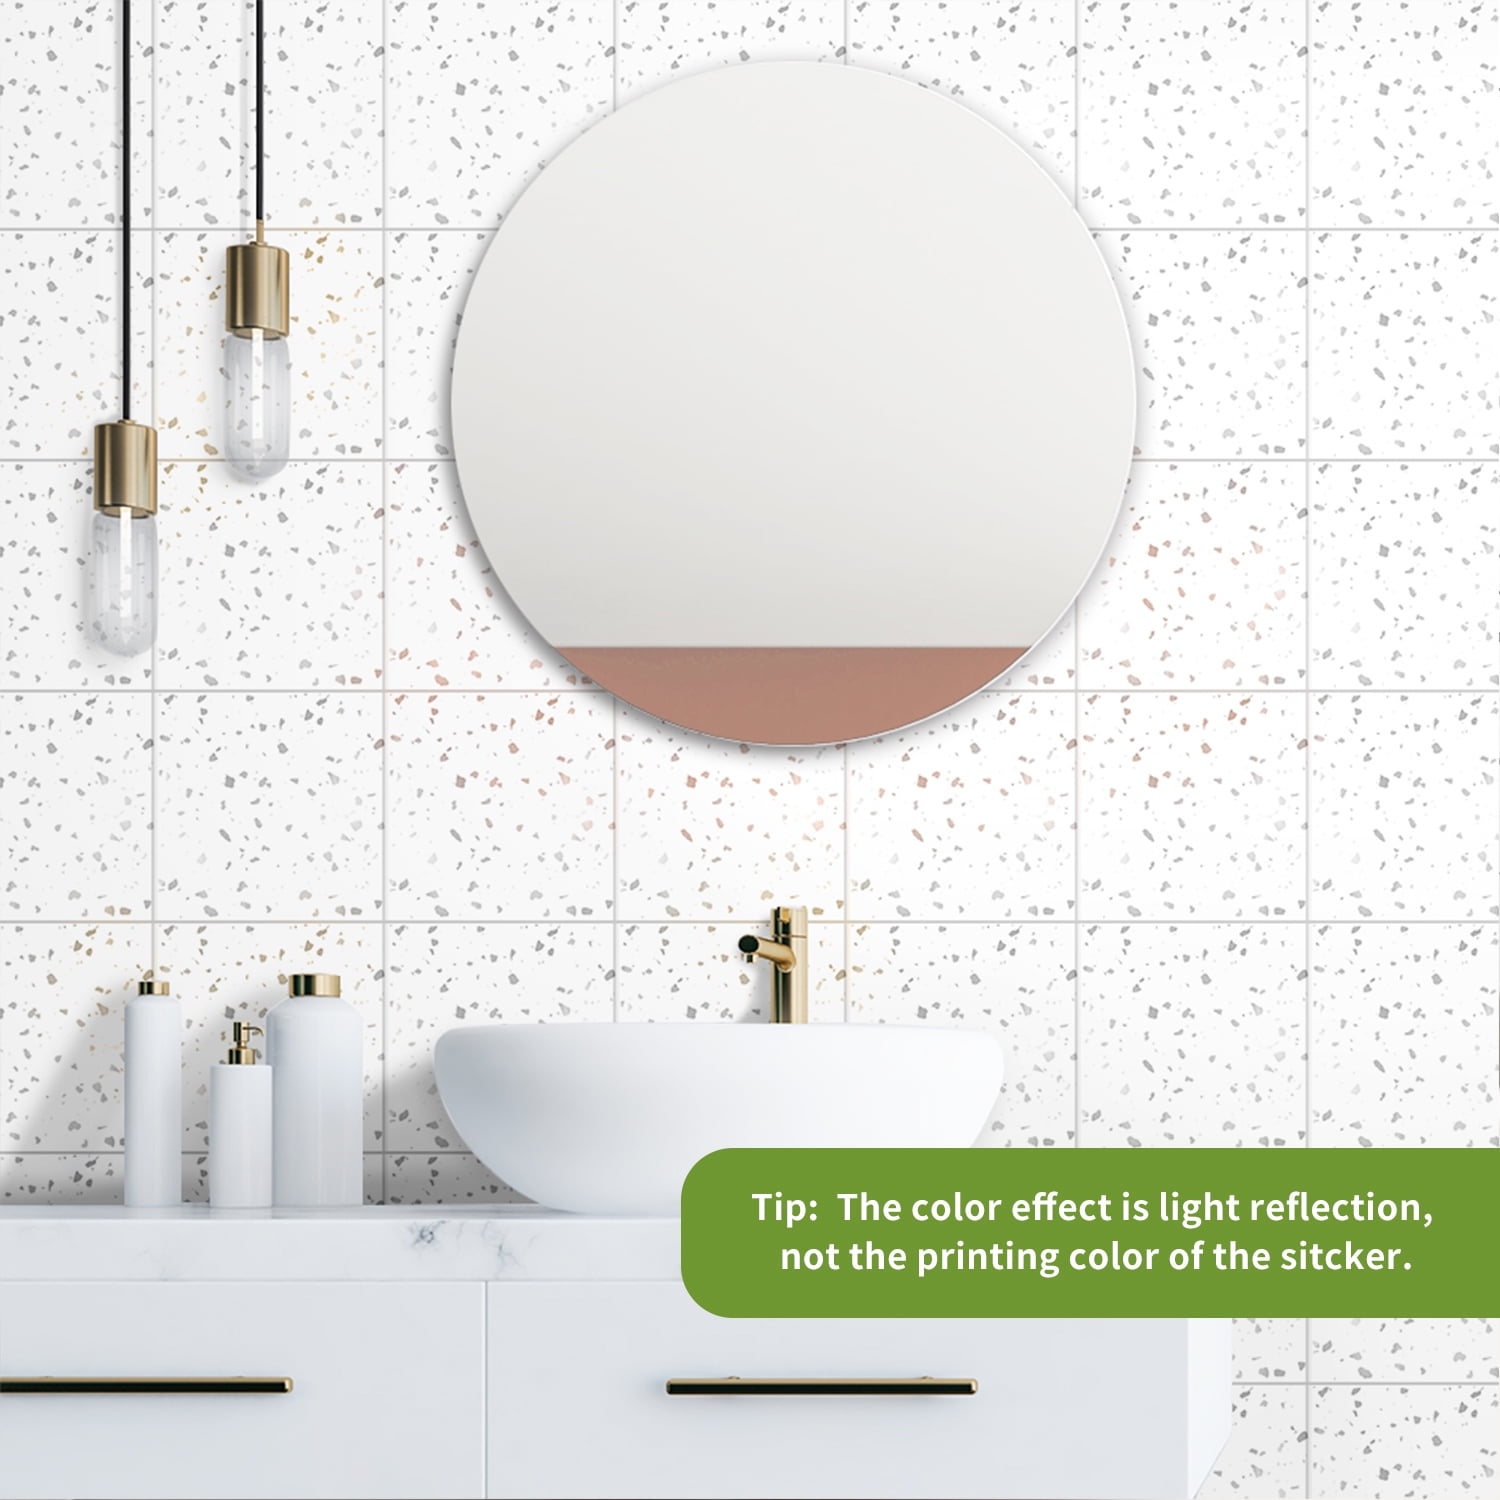 Details about   Waterproof Mirror Tile Wall Sticker Self Adhesive Square Sticker Bathroom Decors 